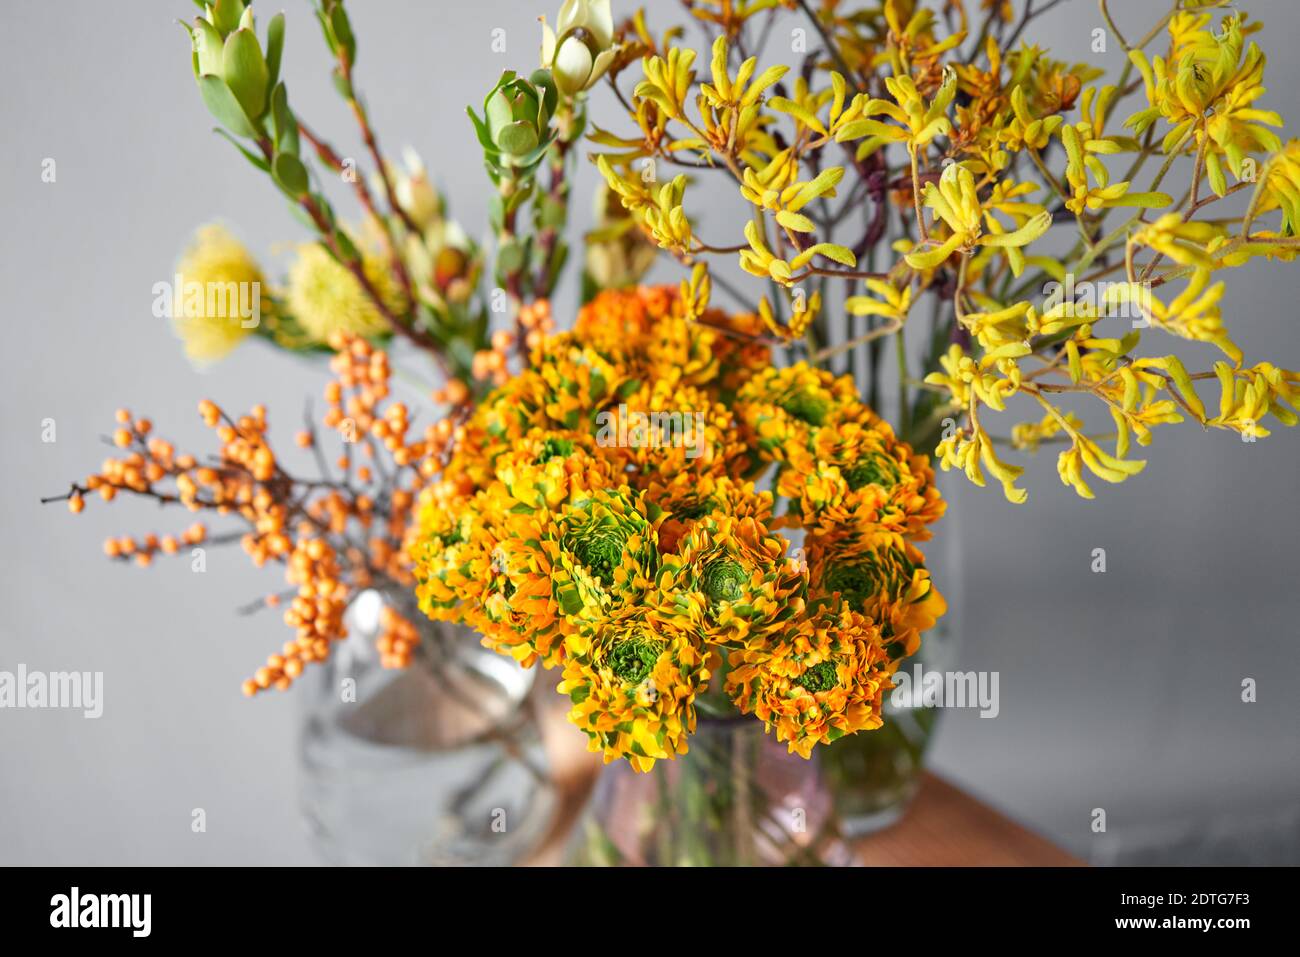 Set of yellow nd orange flowers for Interior decorations. The work of the florist at a flower shop. Fresh cut flower. European floral shop. Delivery Stock Photo